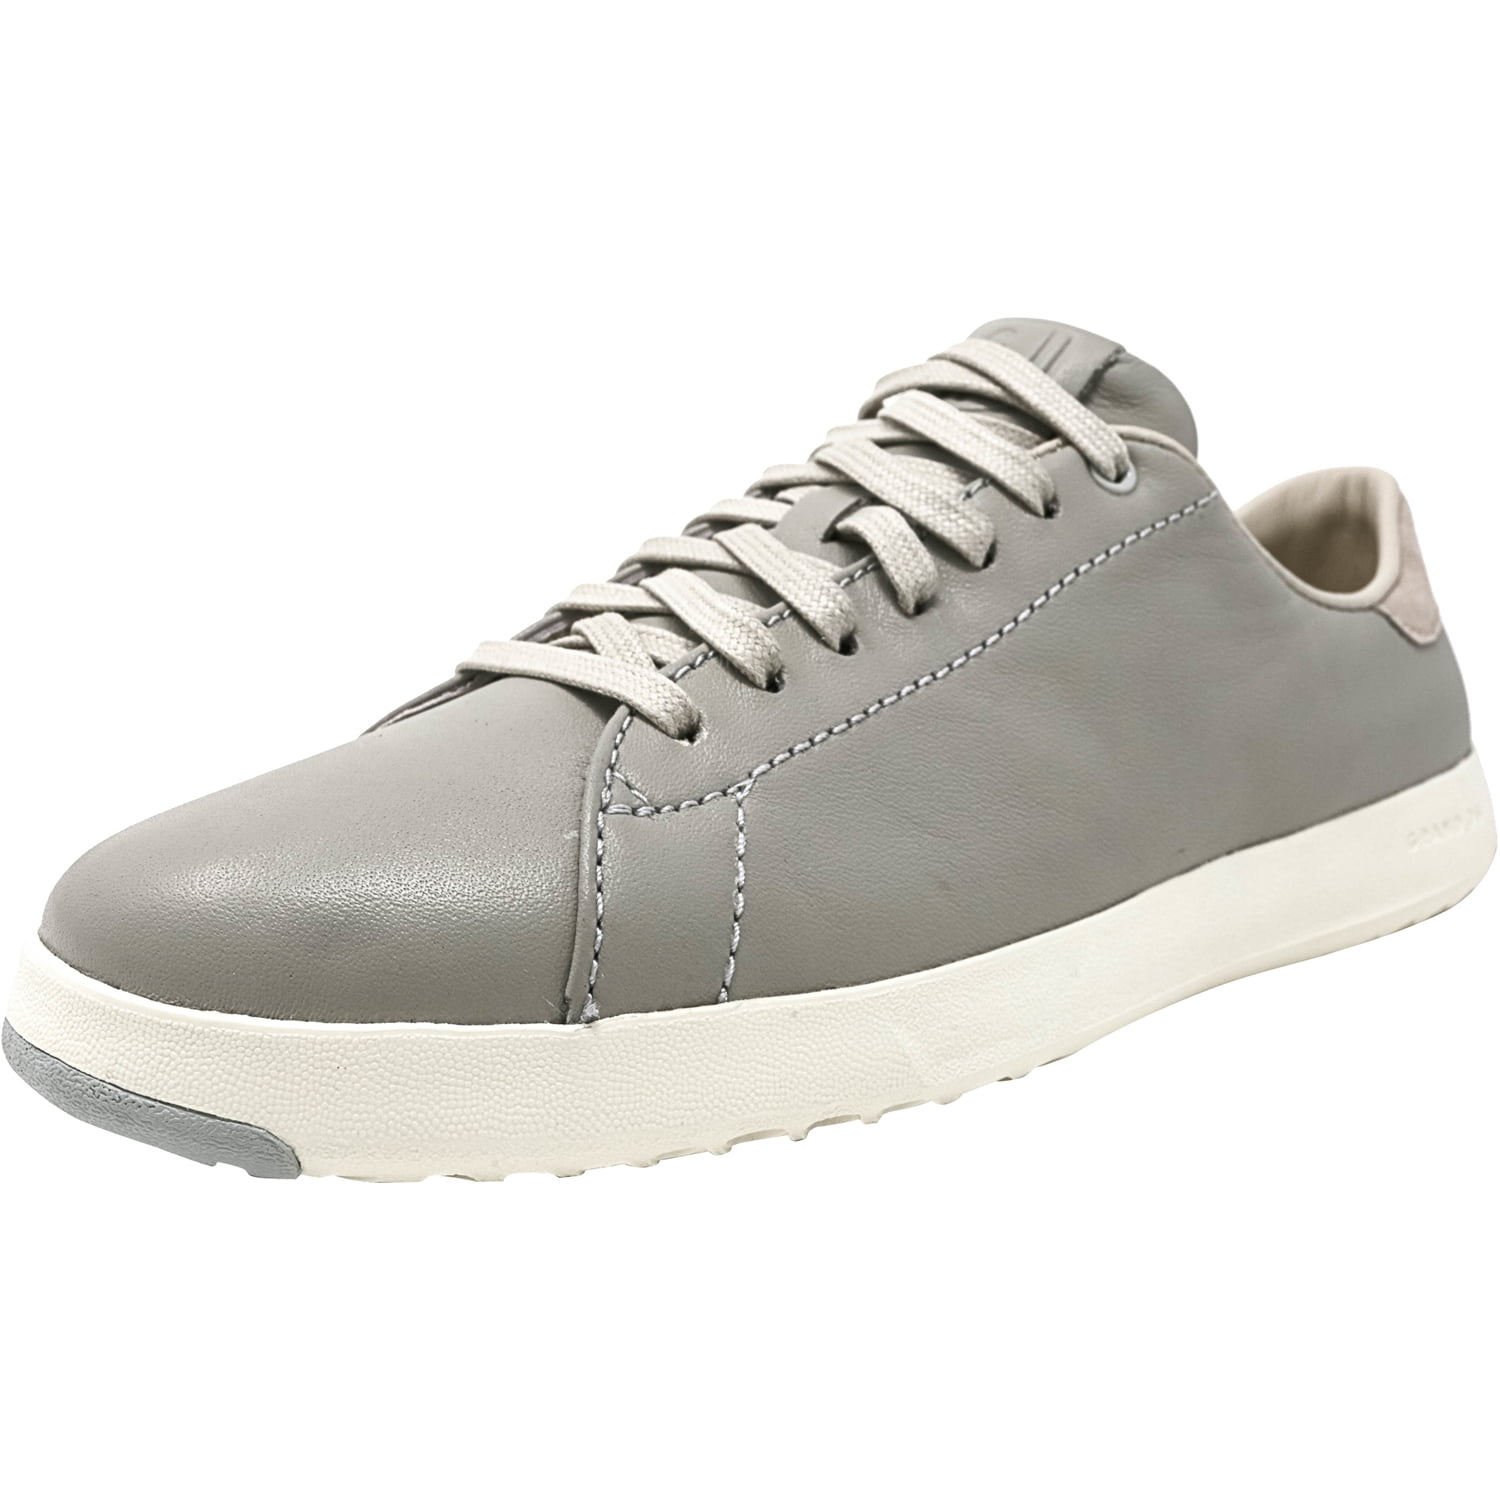 Cole Haan Women's Grandpro Tennis Silverfox Ankle-High Leather Fashion ...